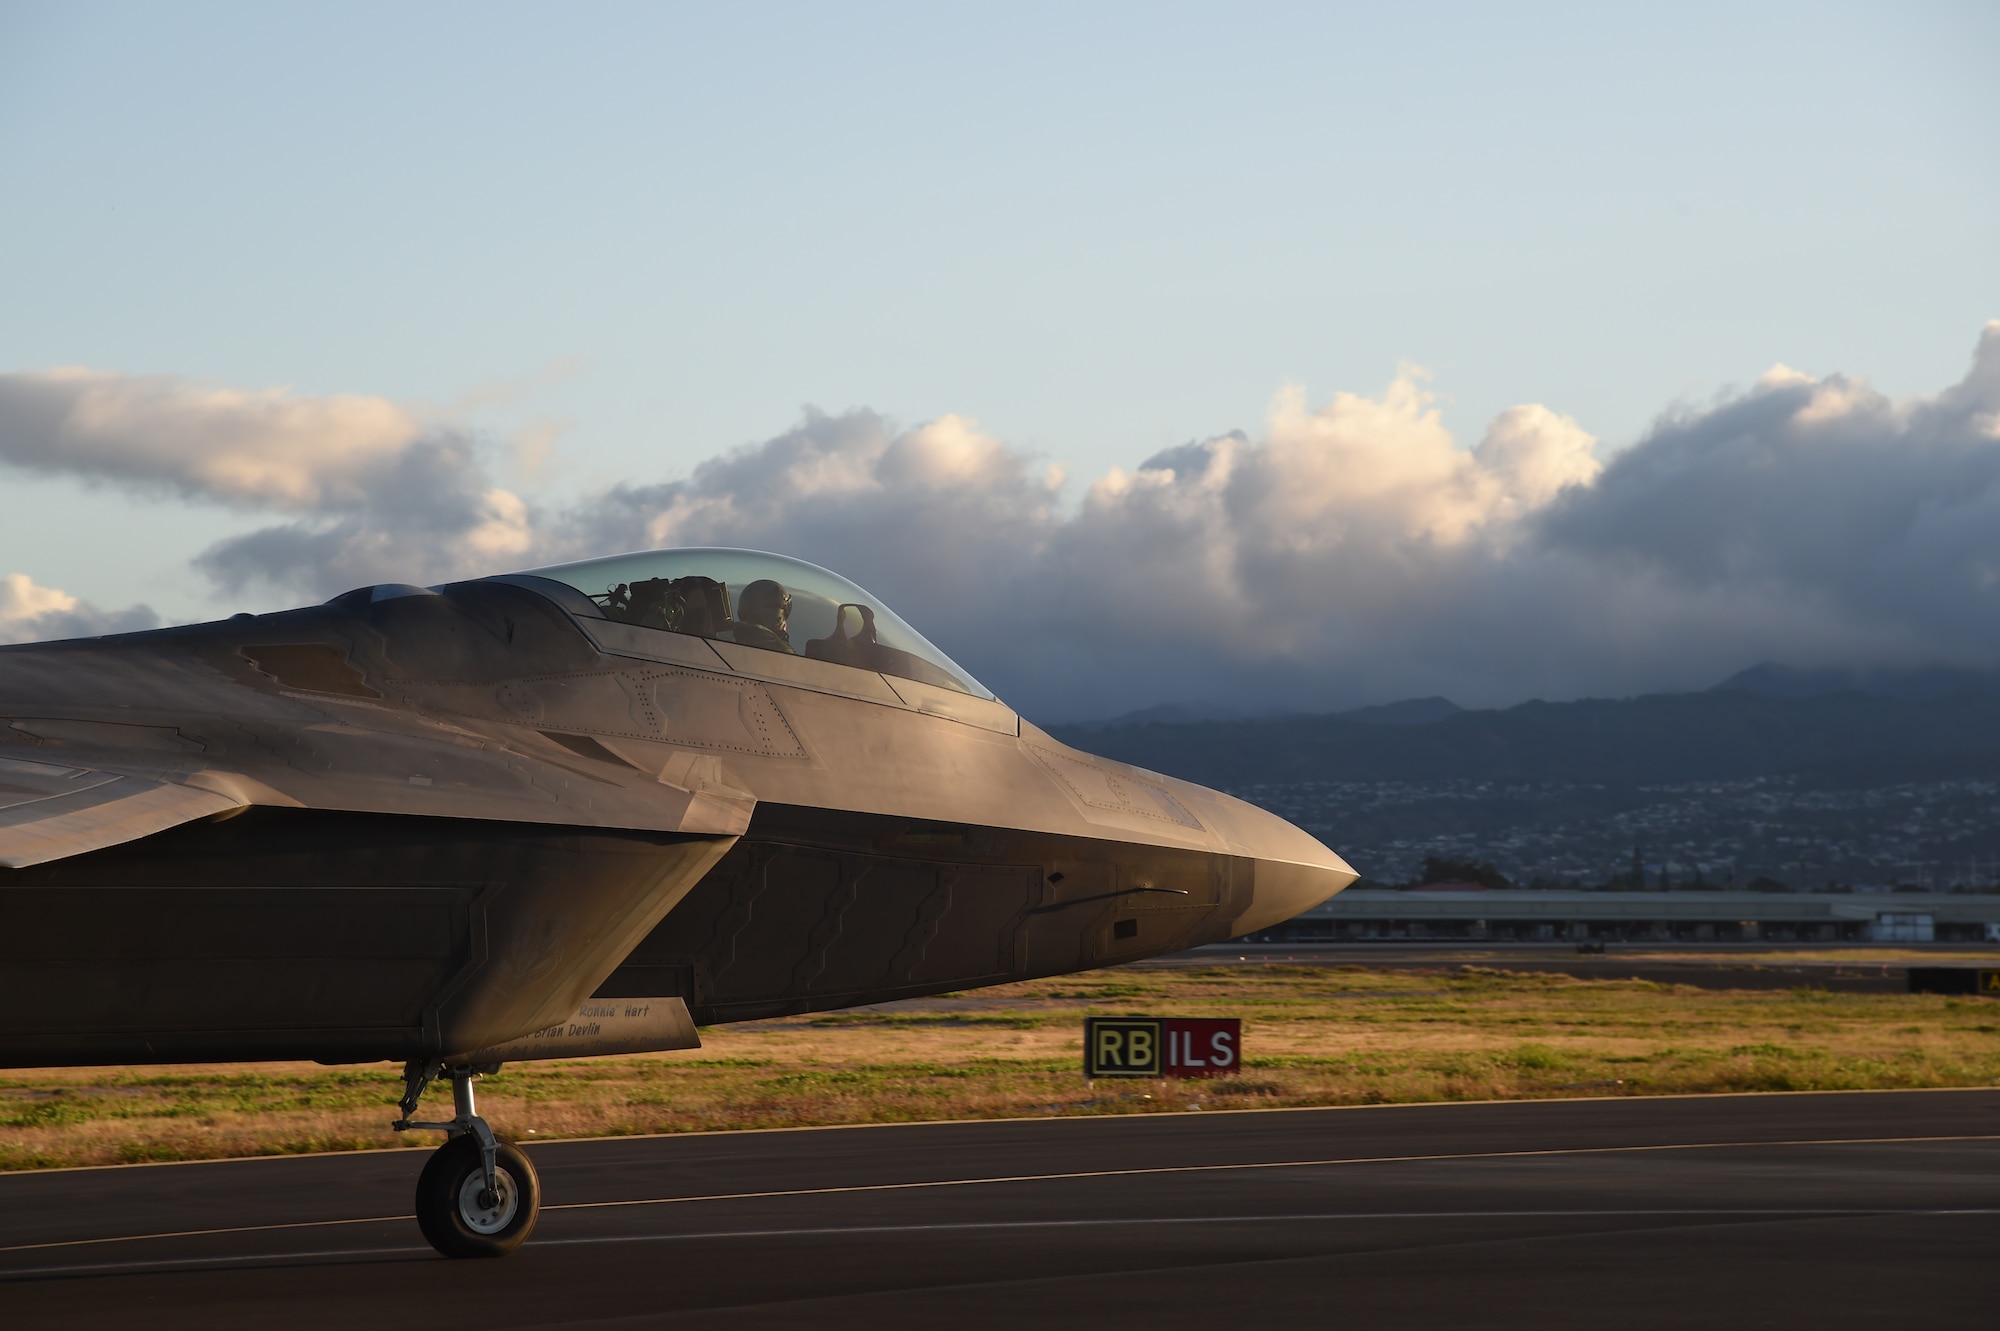 An F-22 Raptor pilot from the 19th Fighter Squadron taxies after completing an end of runway inspection on Joint Base Pearl Harbor-Hickam, Hawaii, June 6, 2015. This was the first aircraft to take off during a record breaking 62 sorties in one day by the Hawaii Air National Guard’s 199th Fighter Squadron and the 19th Fighter Squadron. (U.S. Air Force photo by Tech. Sgt. Aaron Oelrich/Released)    